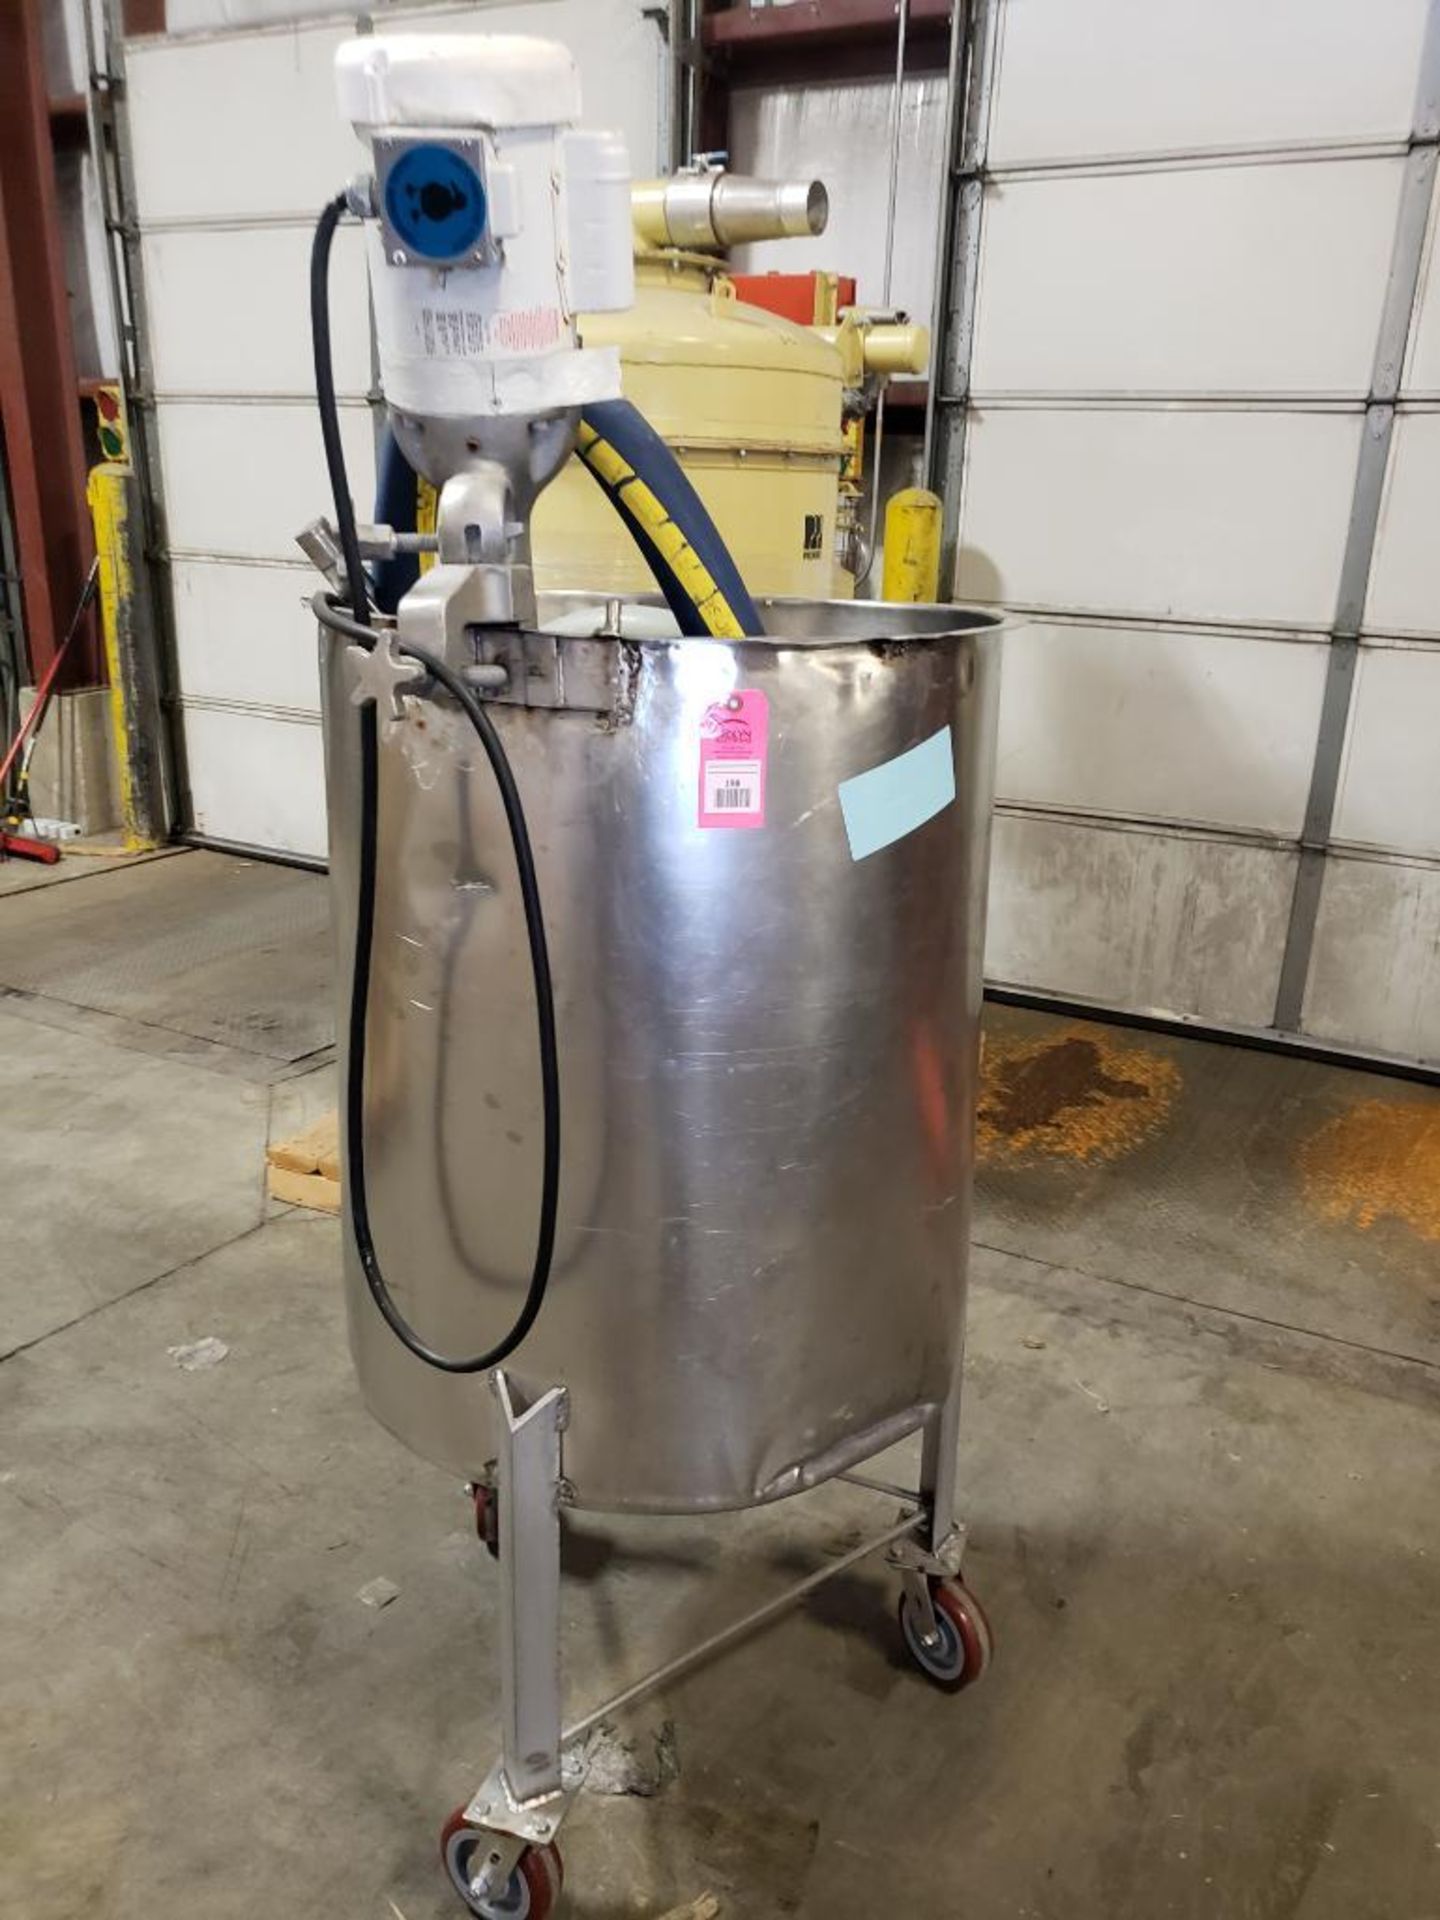 Stainless steel mixing tank with 1hp washdown mixer.